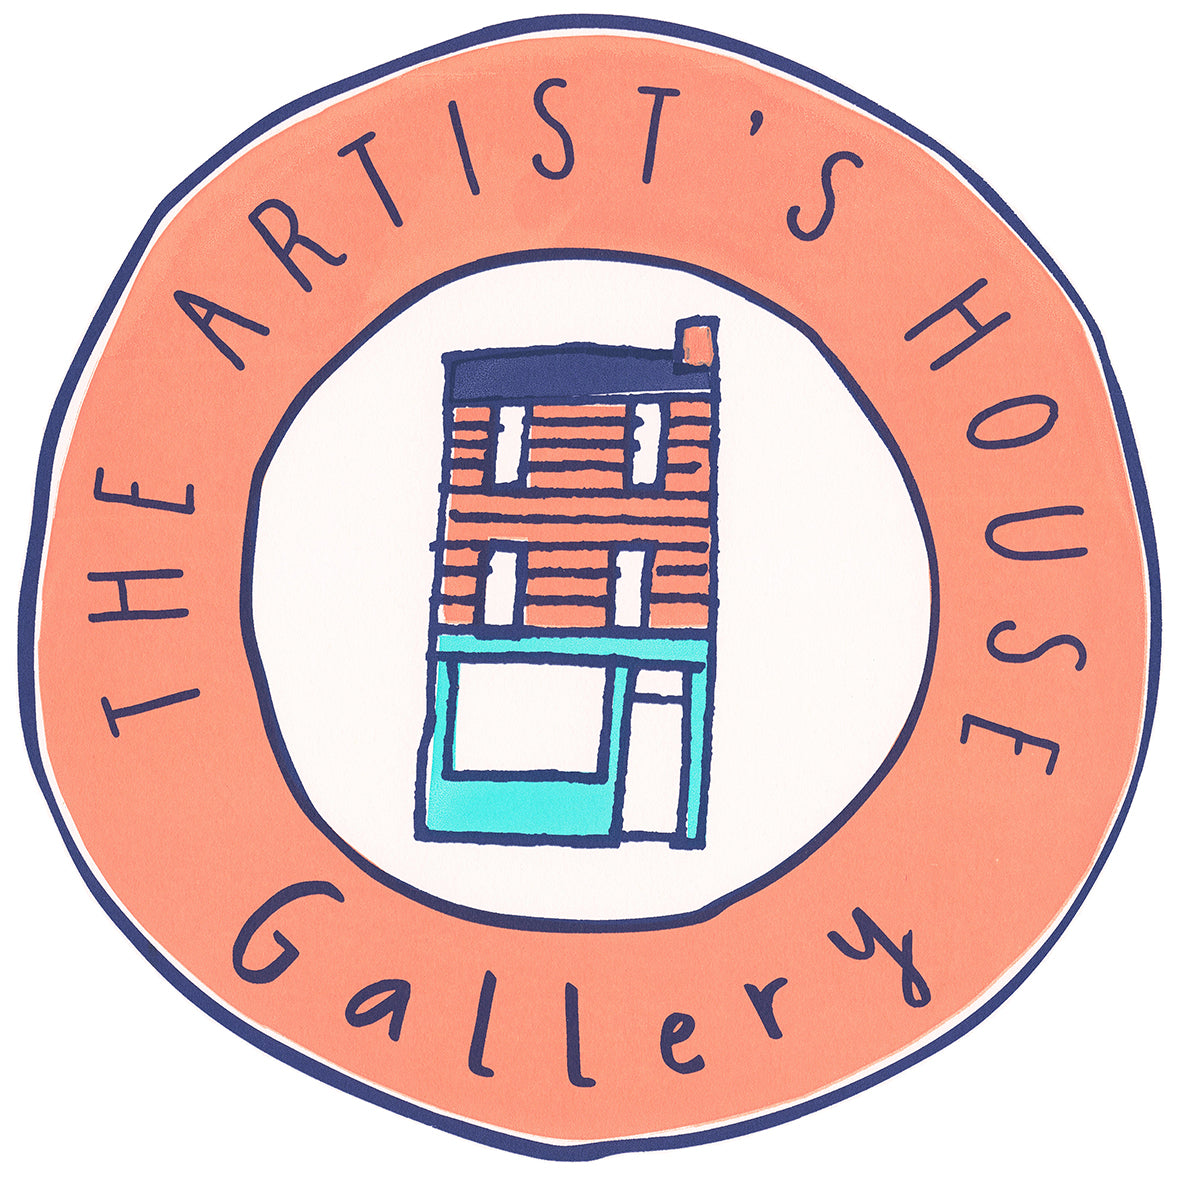 The Artist's House Gallery